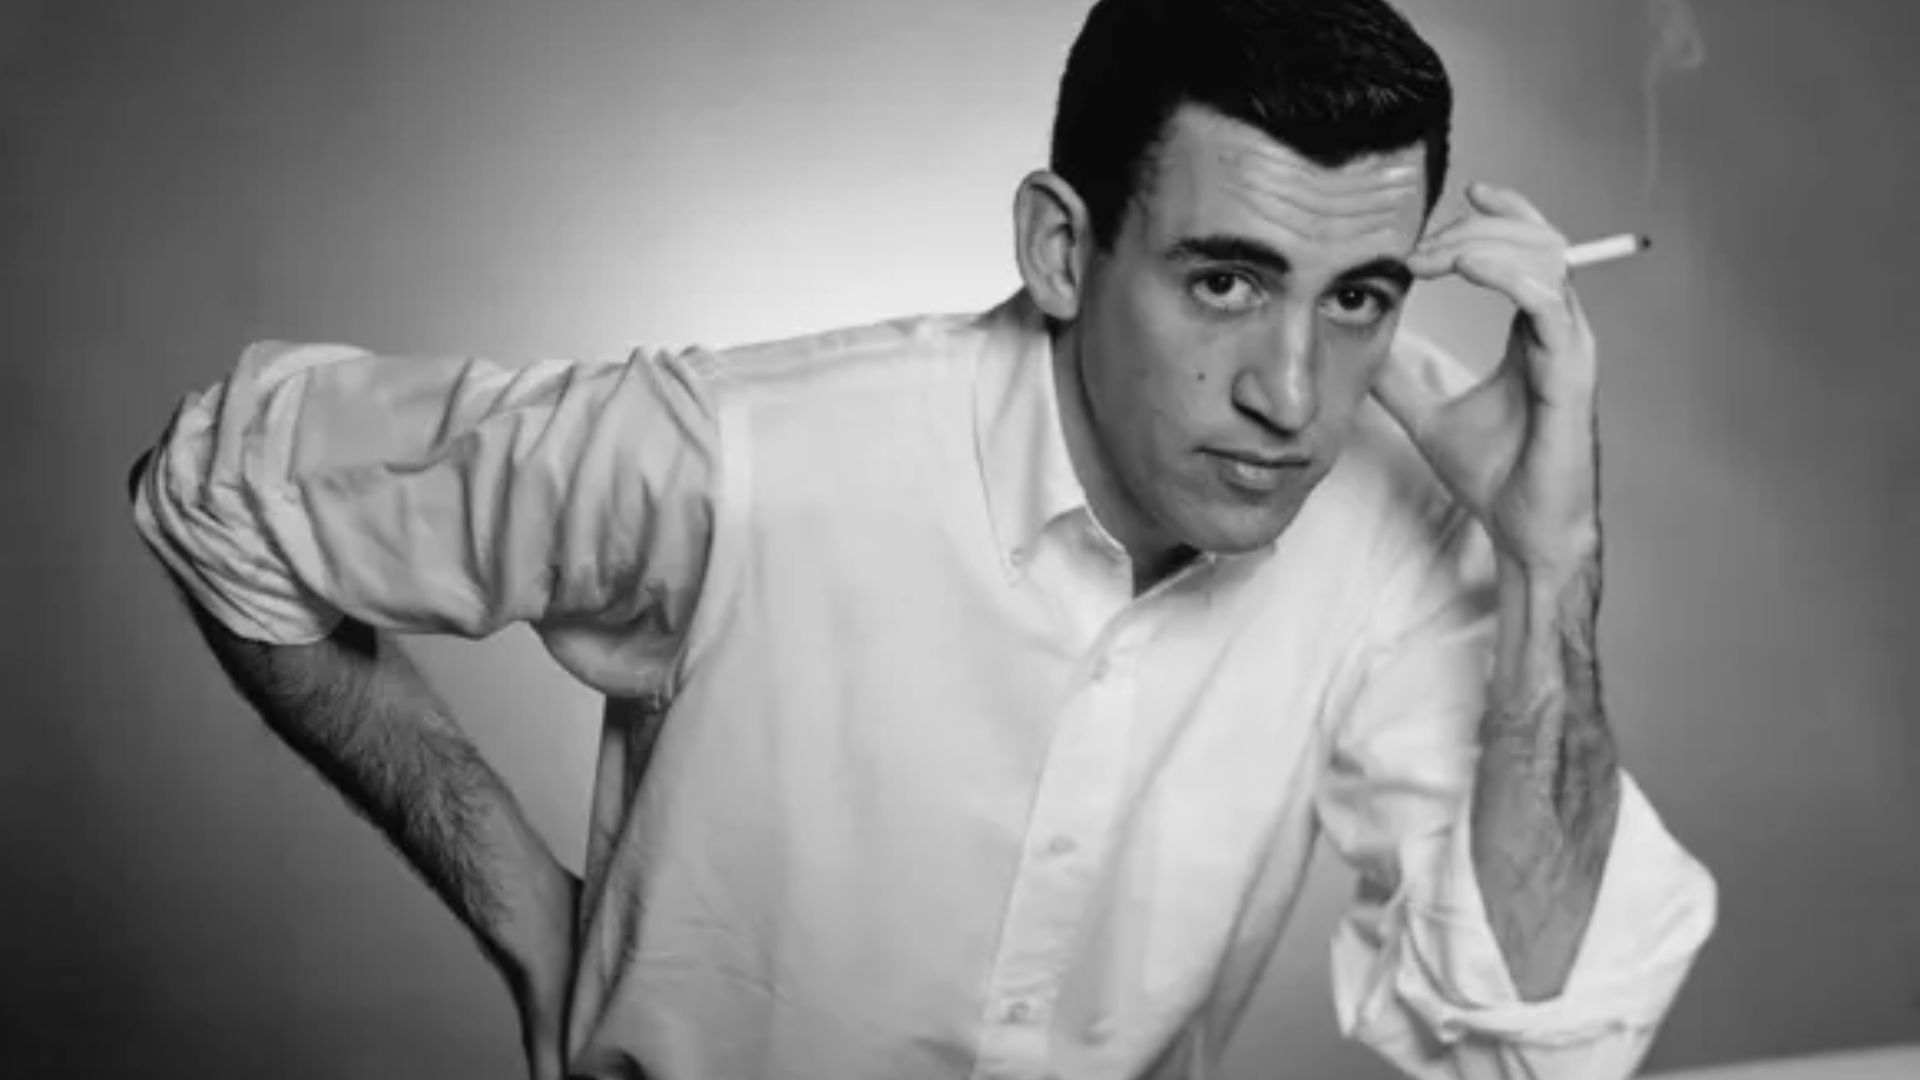 J.D. Salinger Posing With A Cigarette In Hand